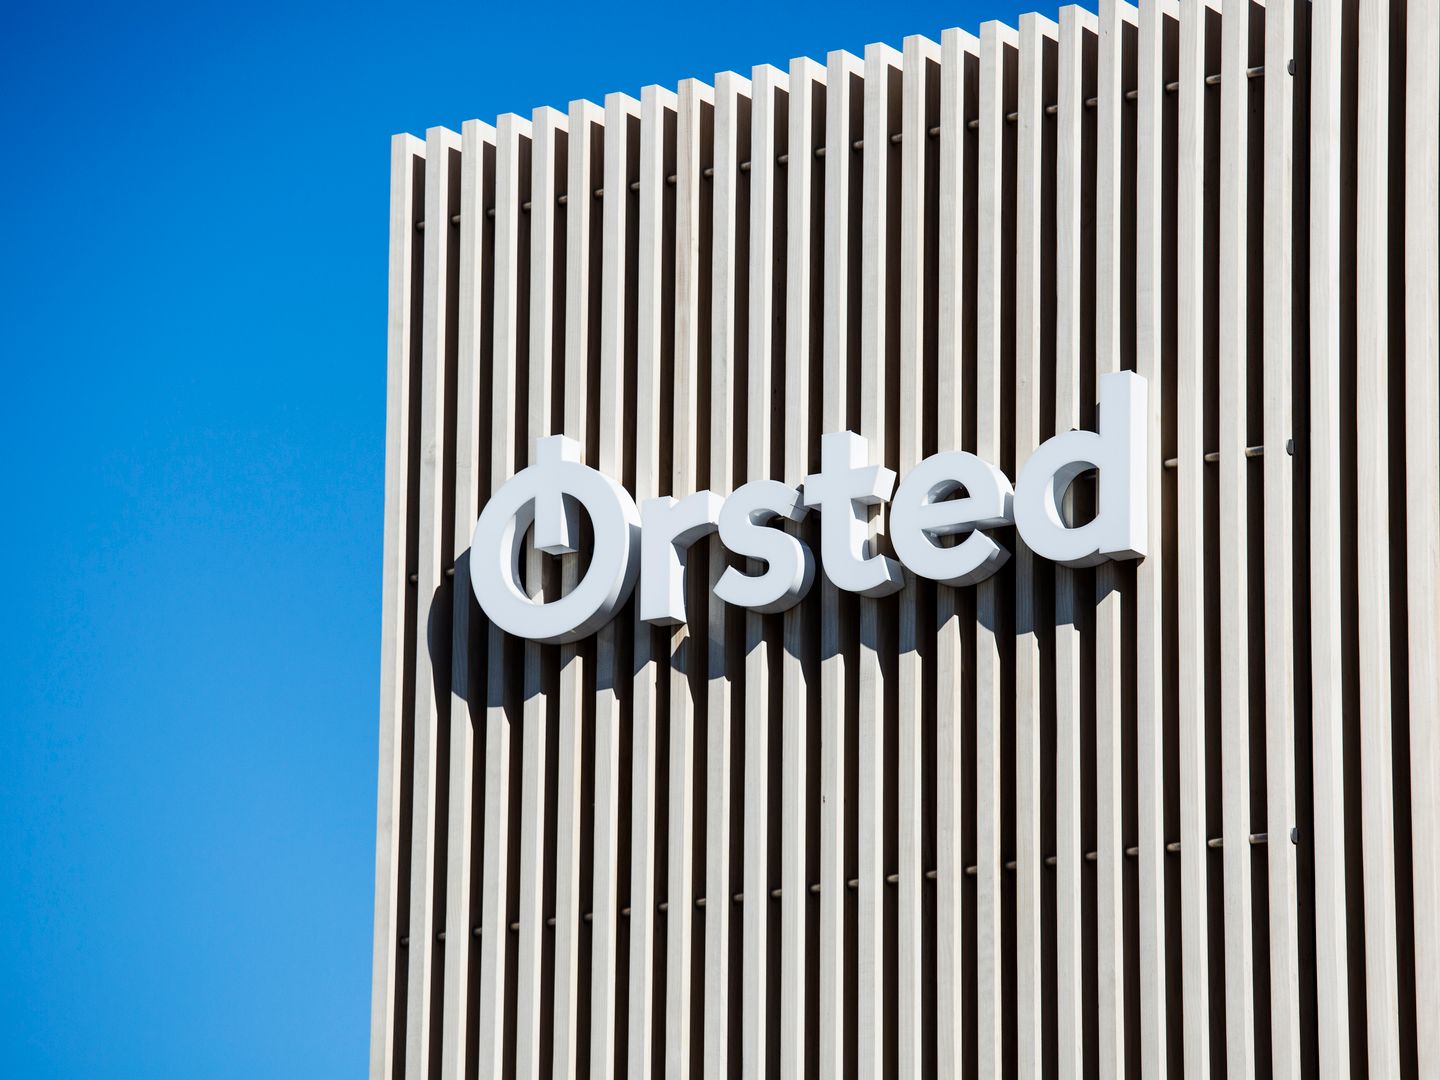 Ørsted owns half of the plant through a joint venture. | Photo: Ørsted / Pr